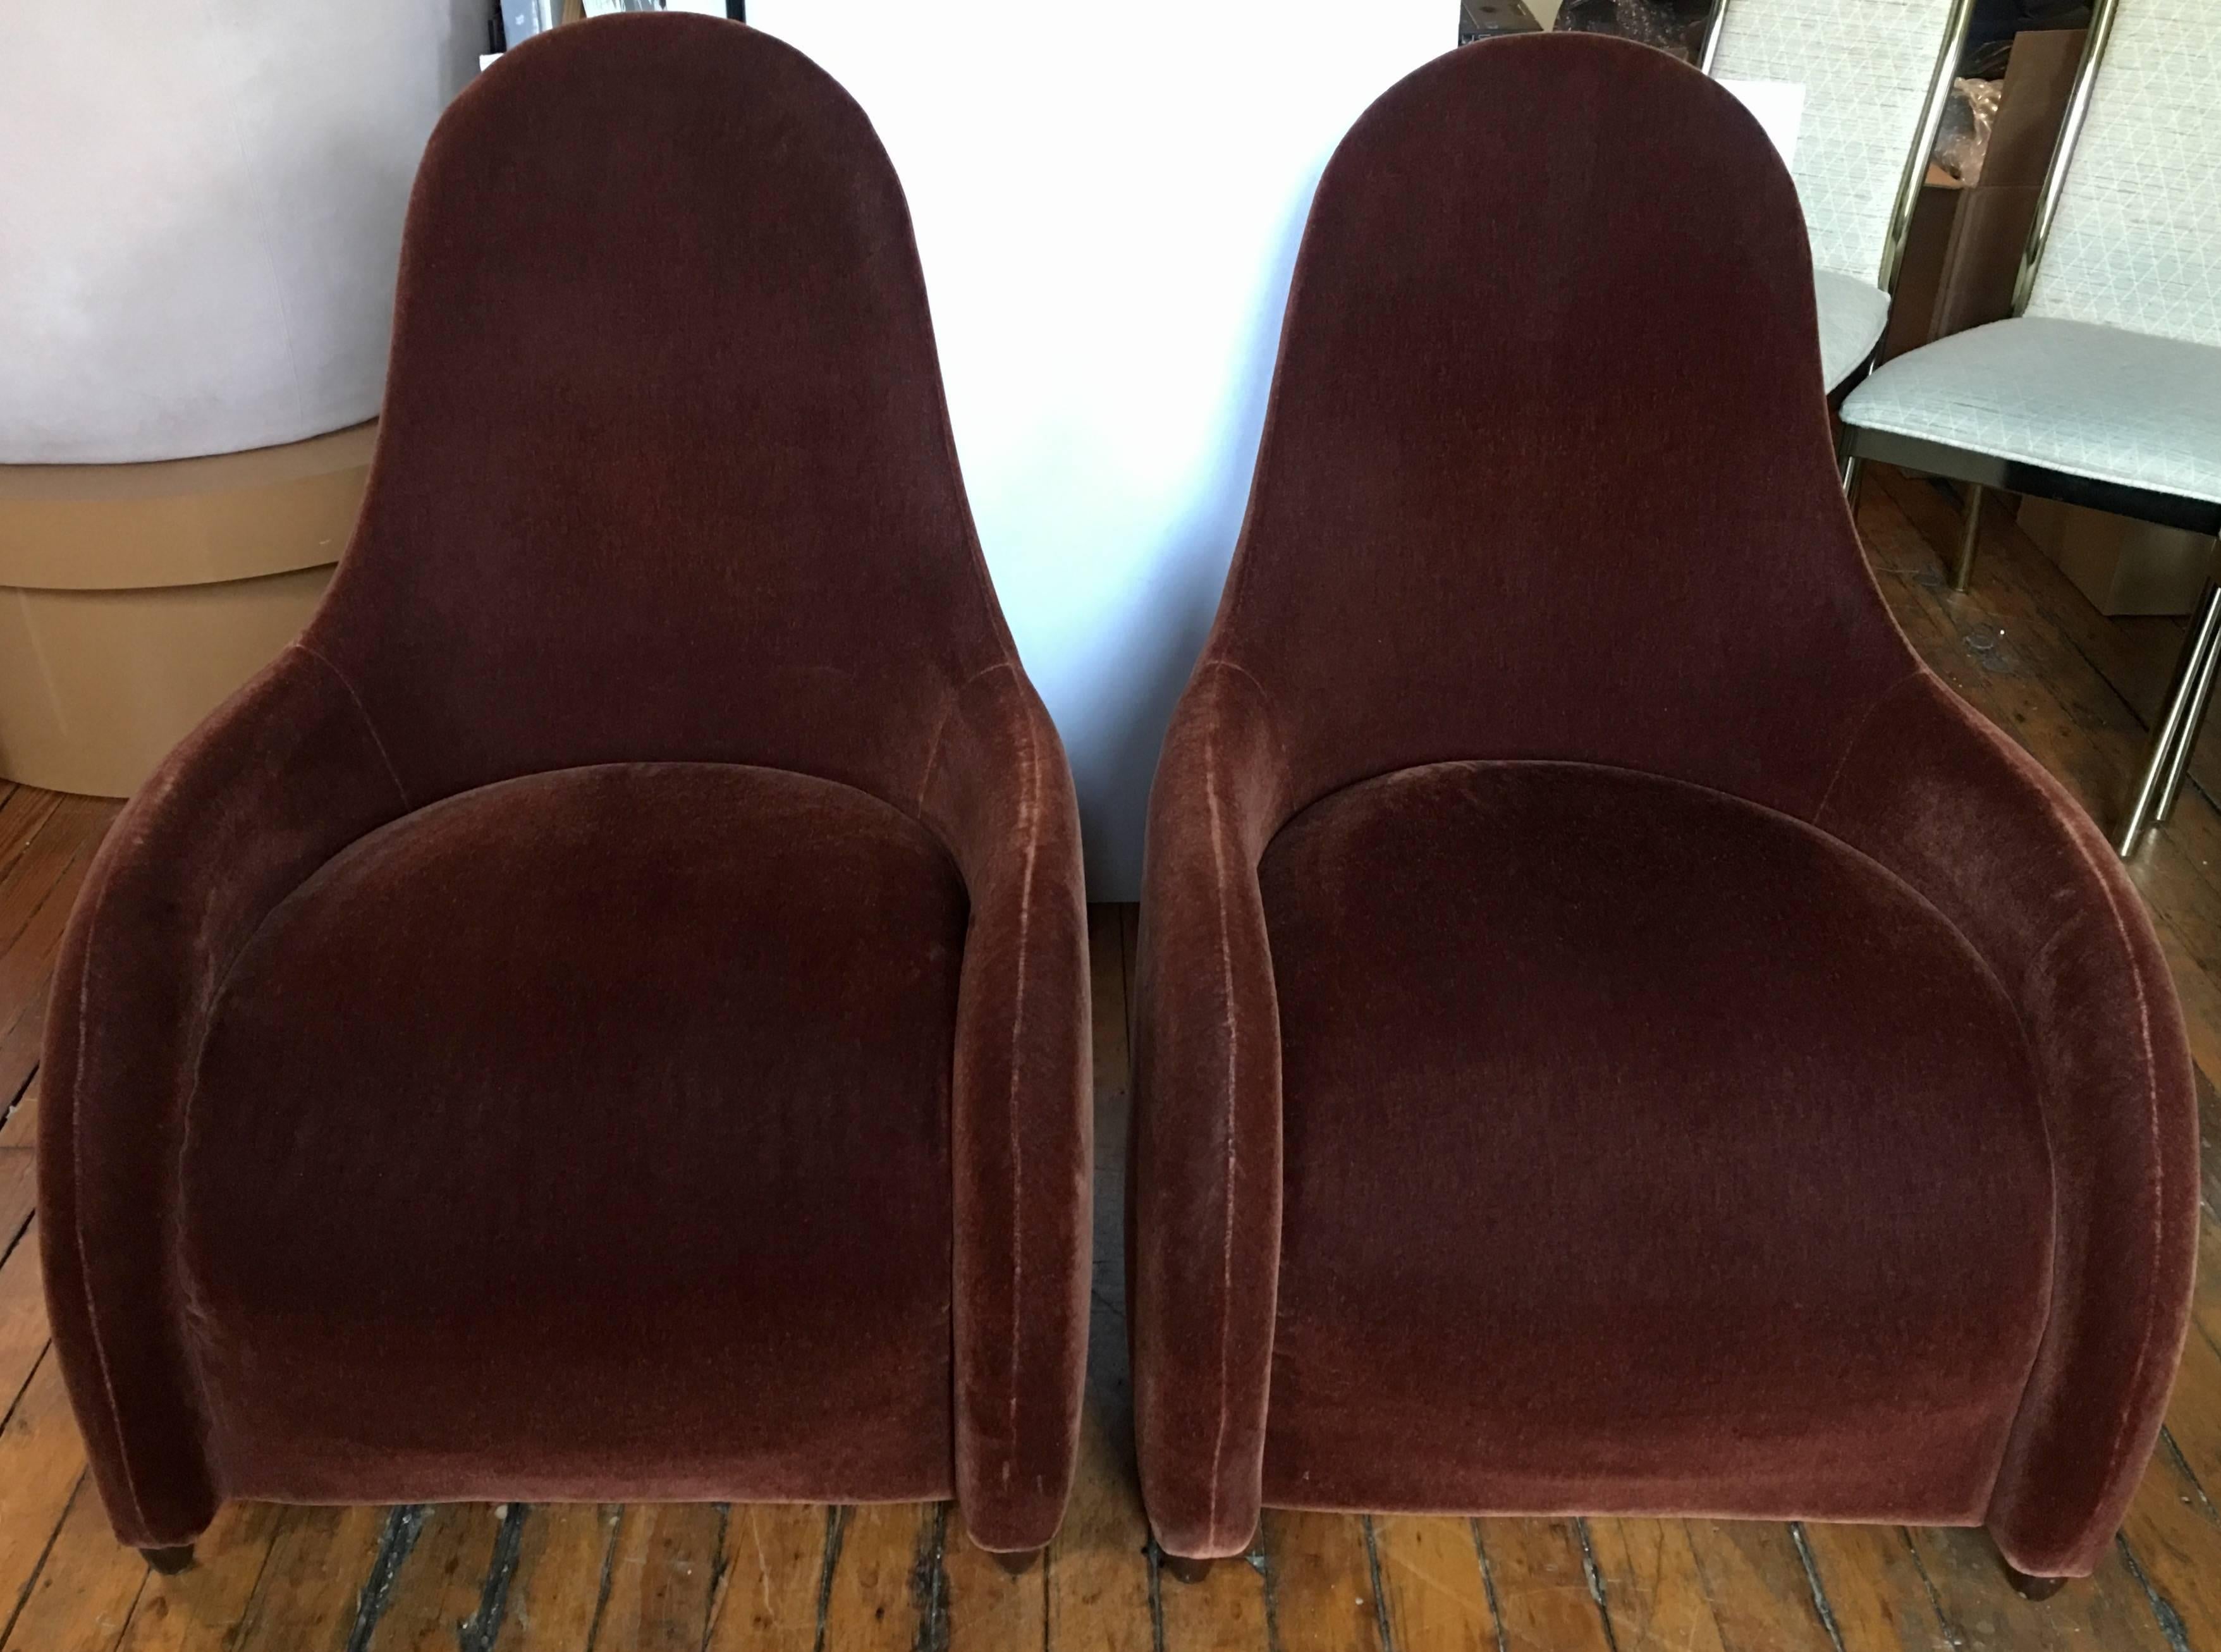 Pair of classical sculptural modern lounge chairs designed by Mitchell Pickard for Brueton Industries. Flowing and curved frames feature original brown tone mohair upholstery. Original upholstery labels dated 2009.

Total of four chairs available.